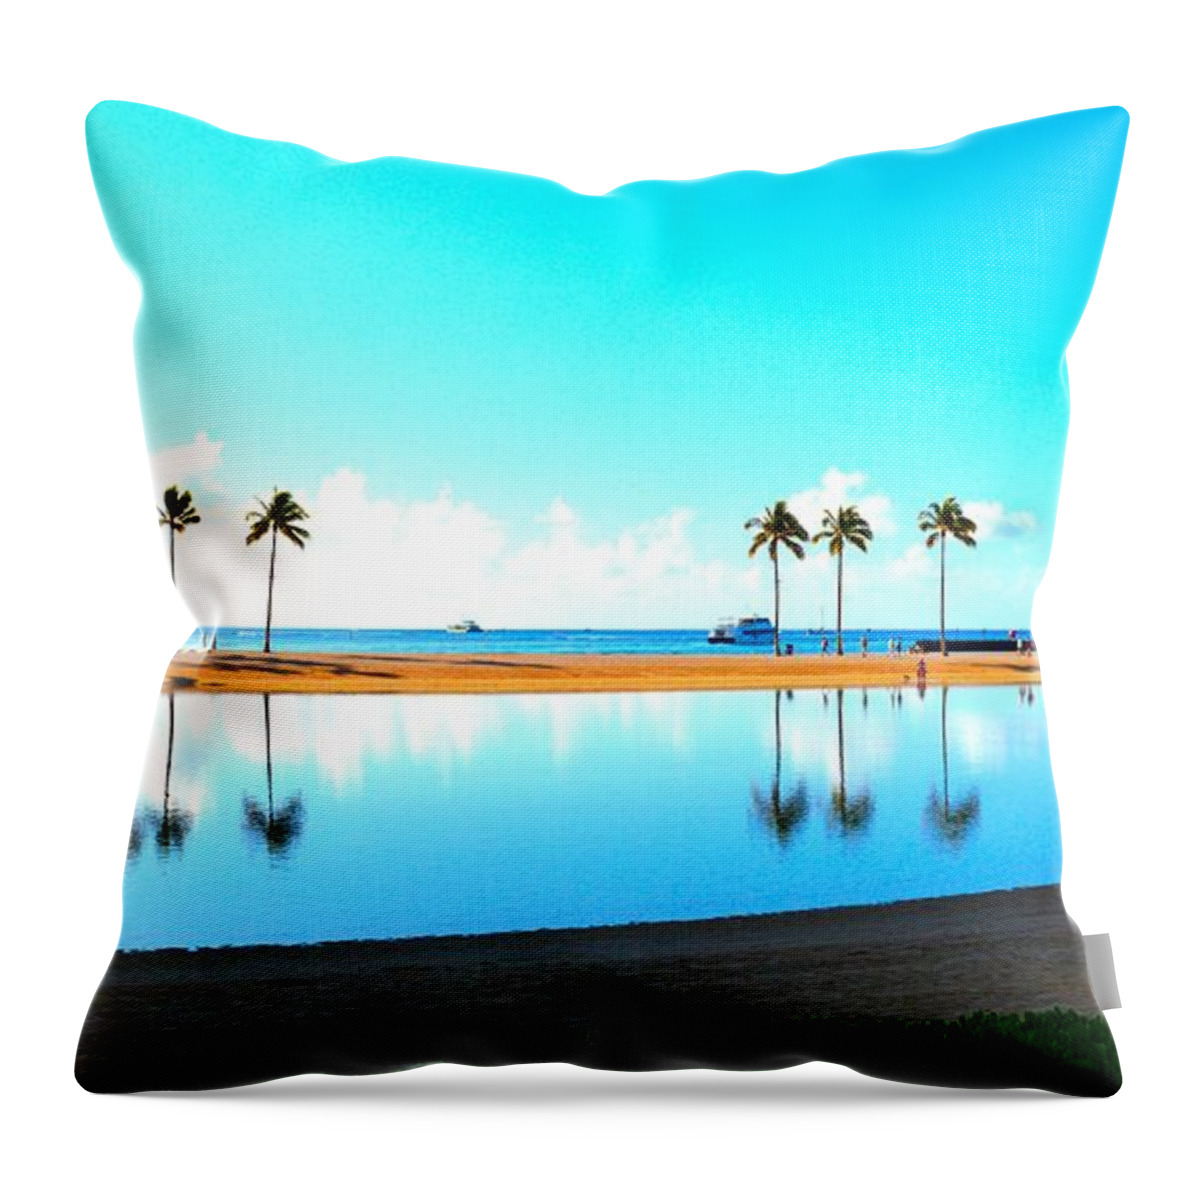 Reflection Throw Pillow featuring the photograph Peaceful Reflections by Jeremy Hall